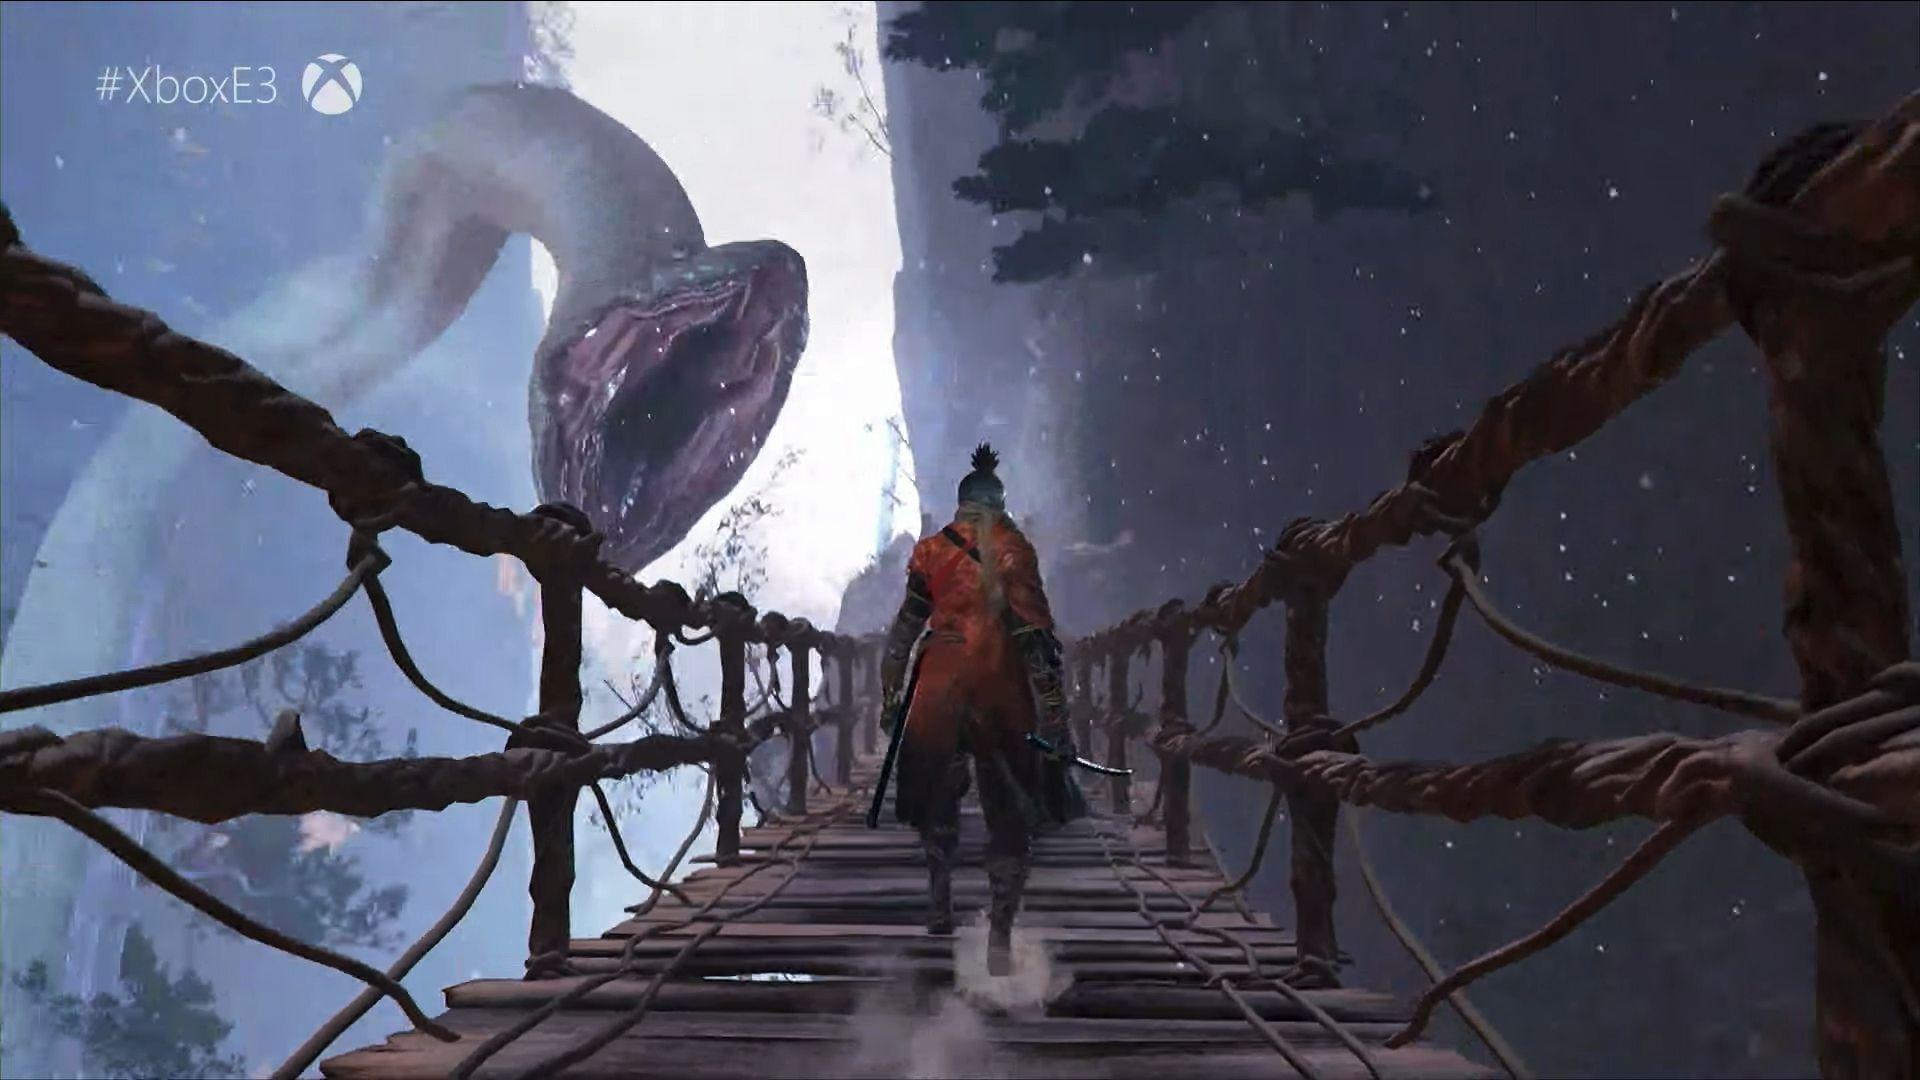 Did anyone else get a Tenchu vibe from Sekiro: Shadows Die Twice